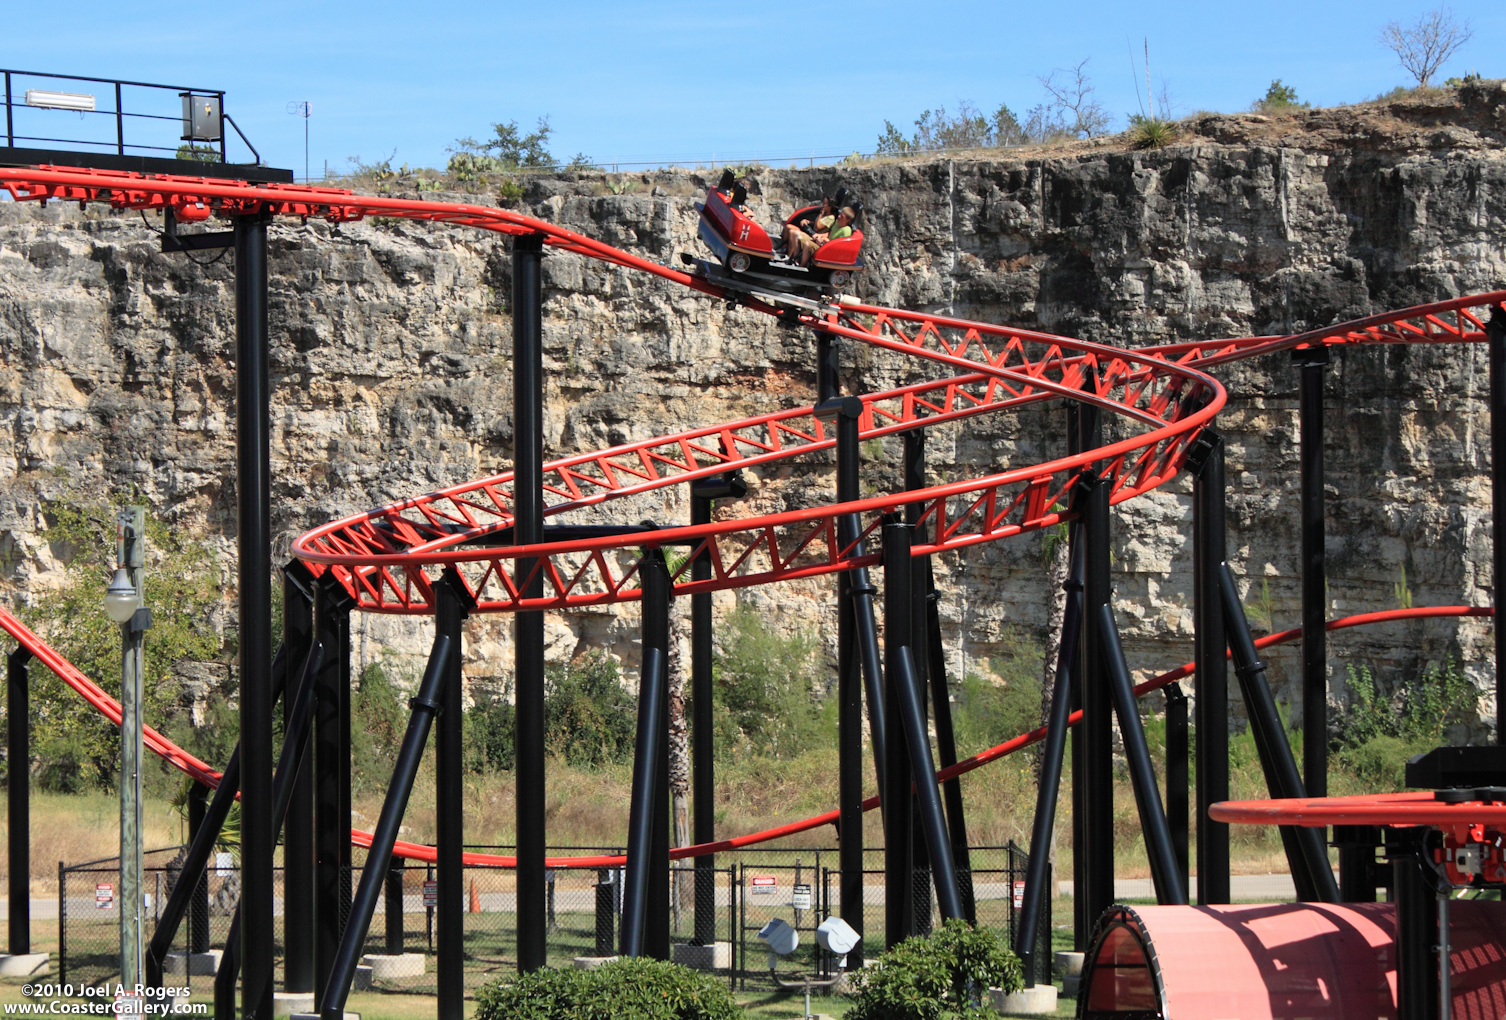 Roller coaster in a quarry. Built by Gerstlauer Elektro GmbH.